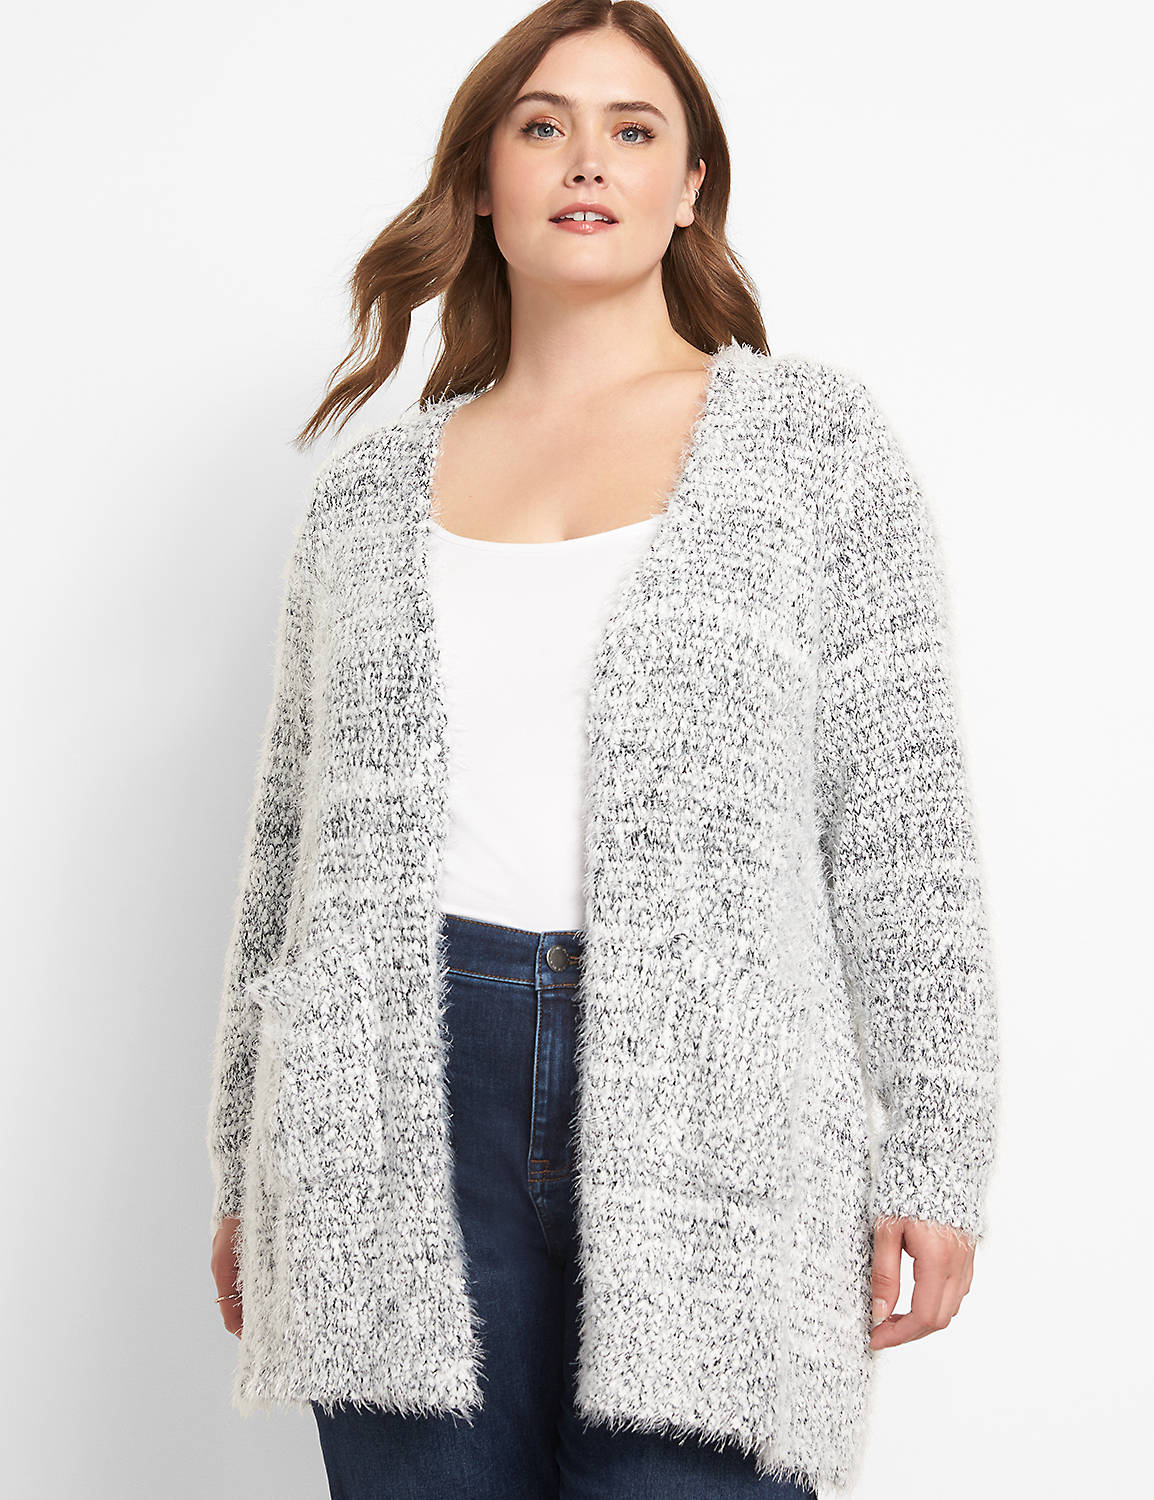 Open-Front Marled Cardigan Product Image 1